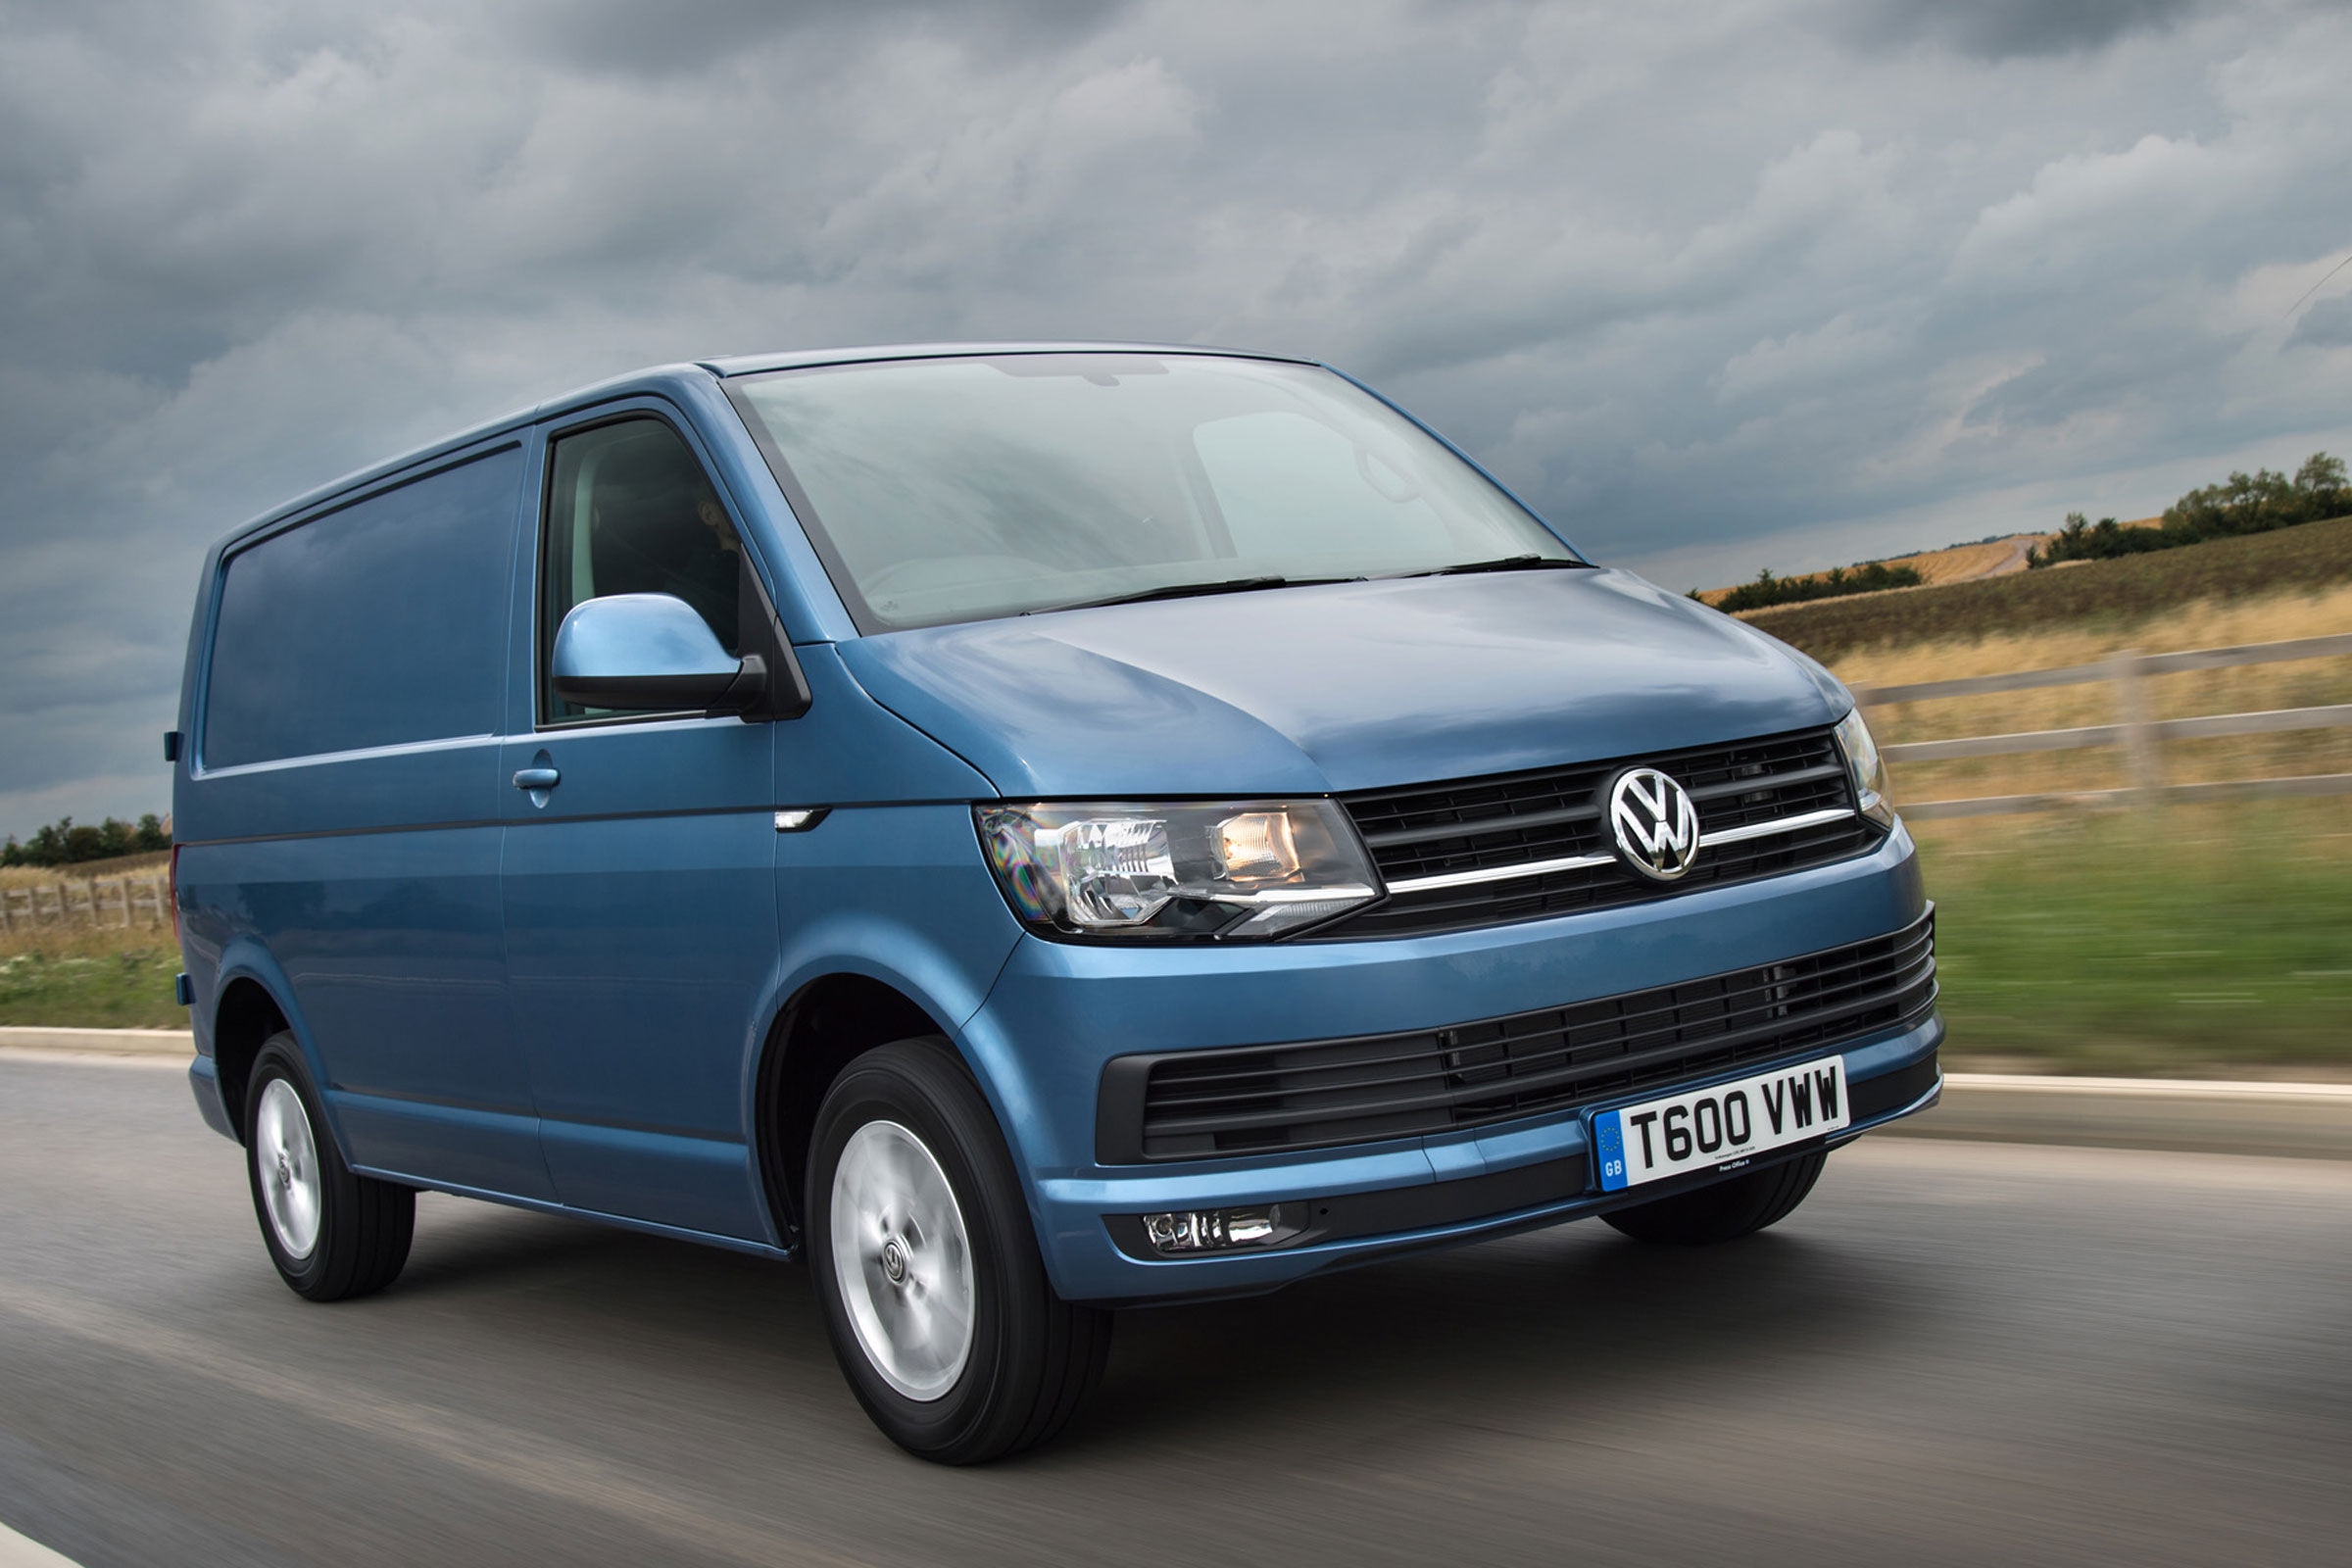 Volkswagen T6 2020 in Pakistan - Check Out Features and Technical Details